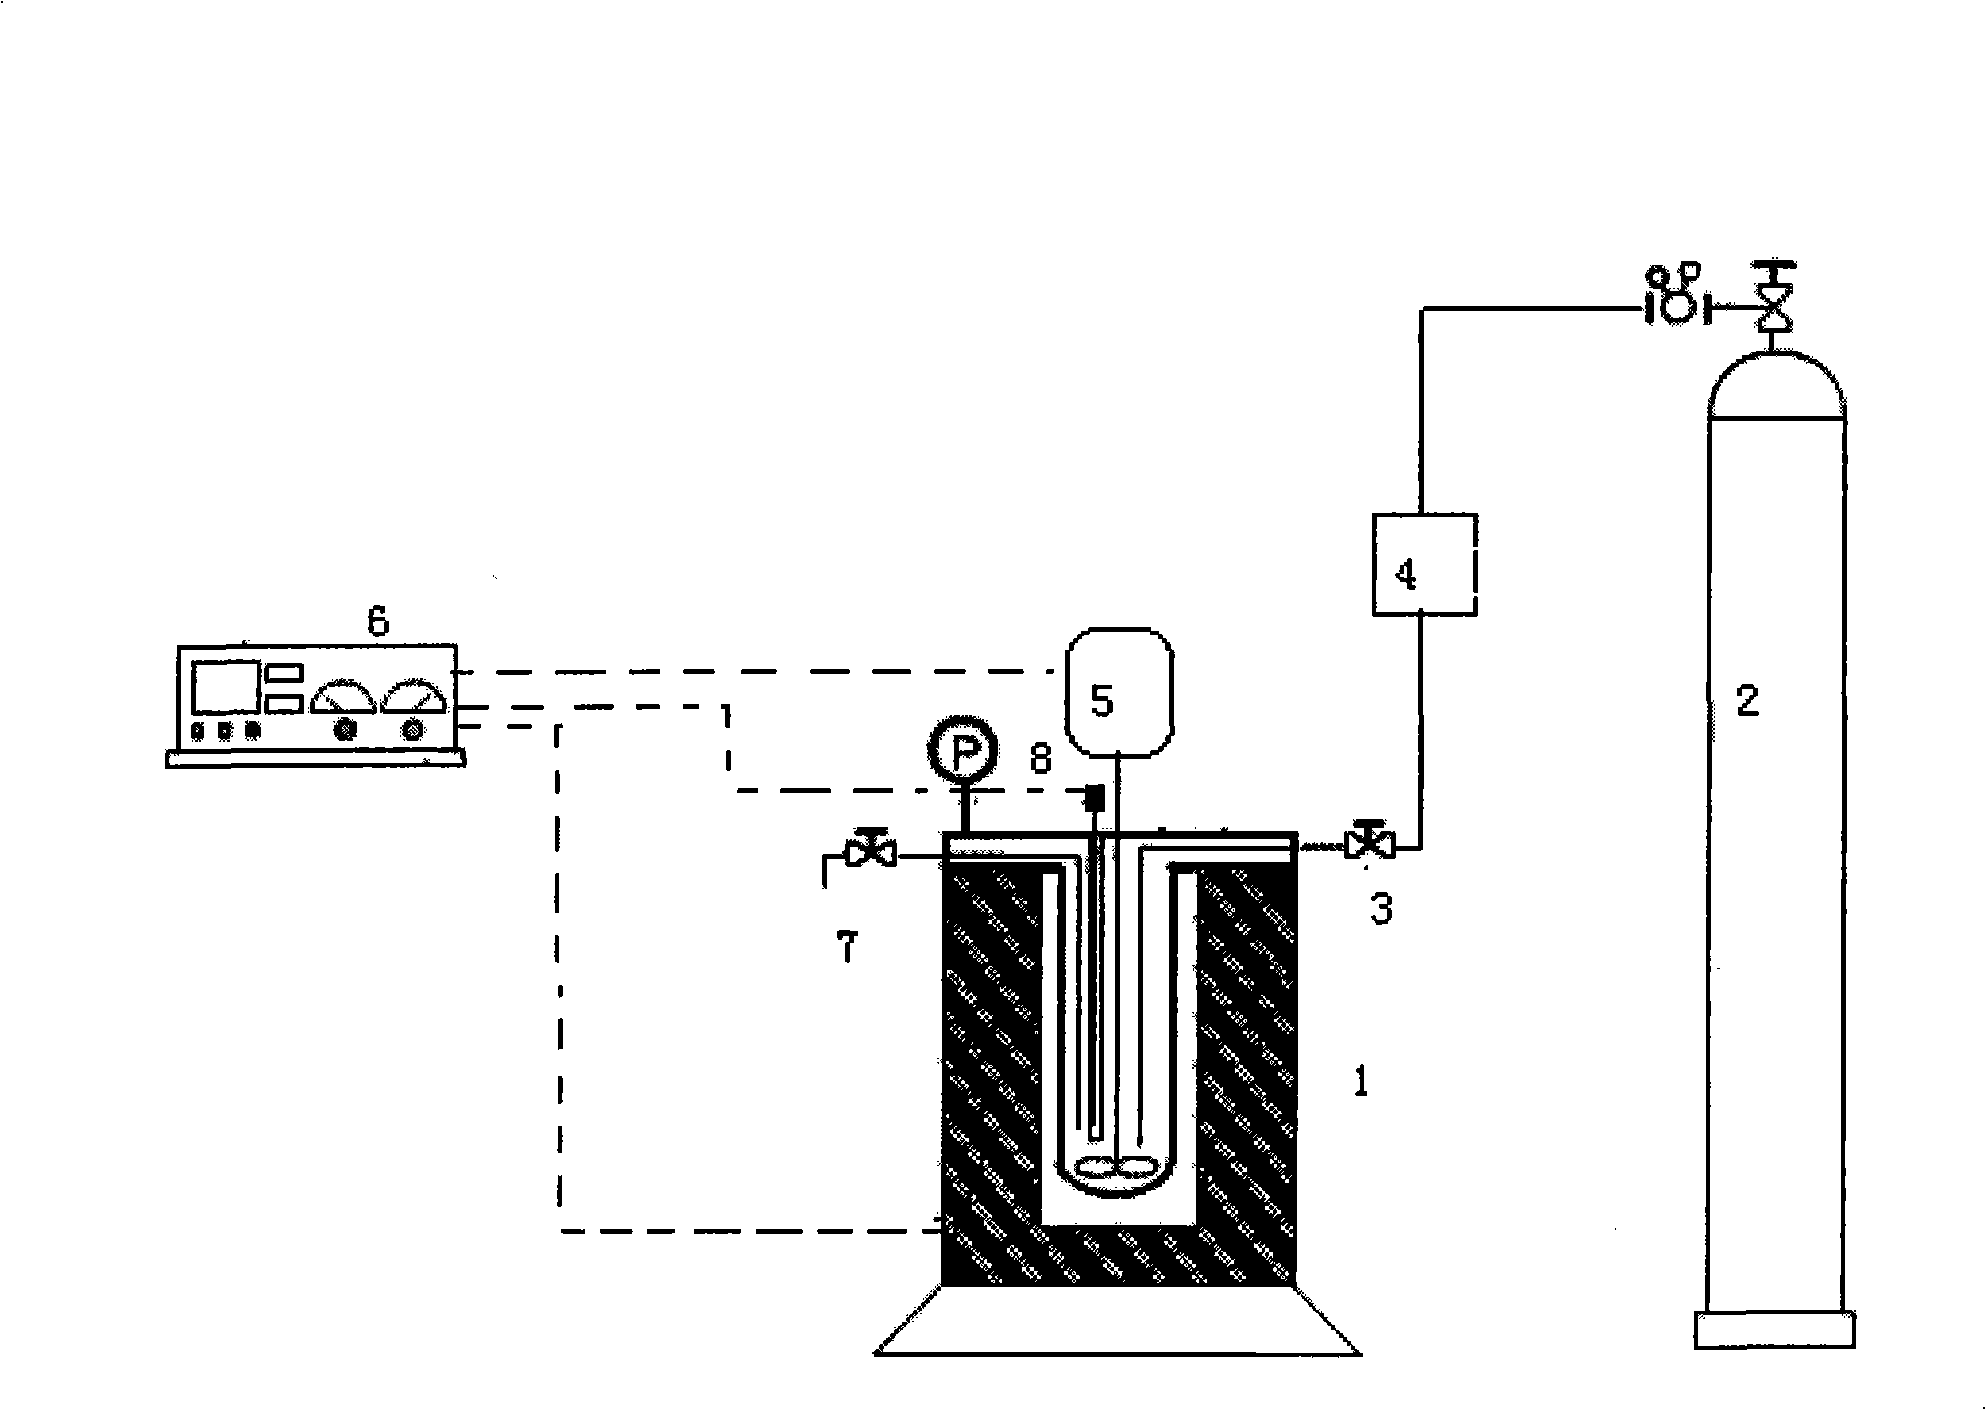 Method for preparing diethyl carbonate by two-step coupling reaction